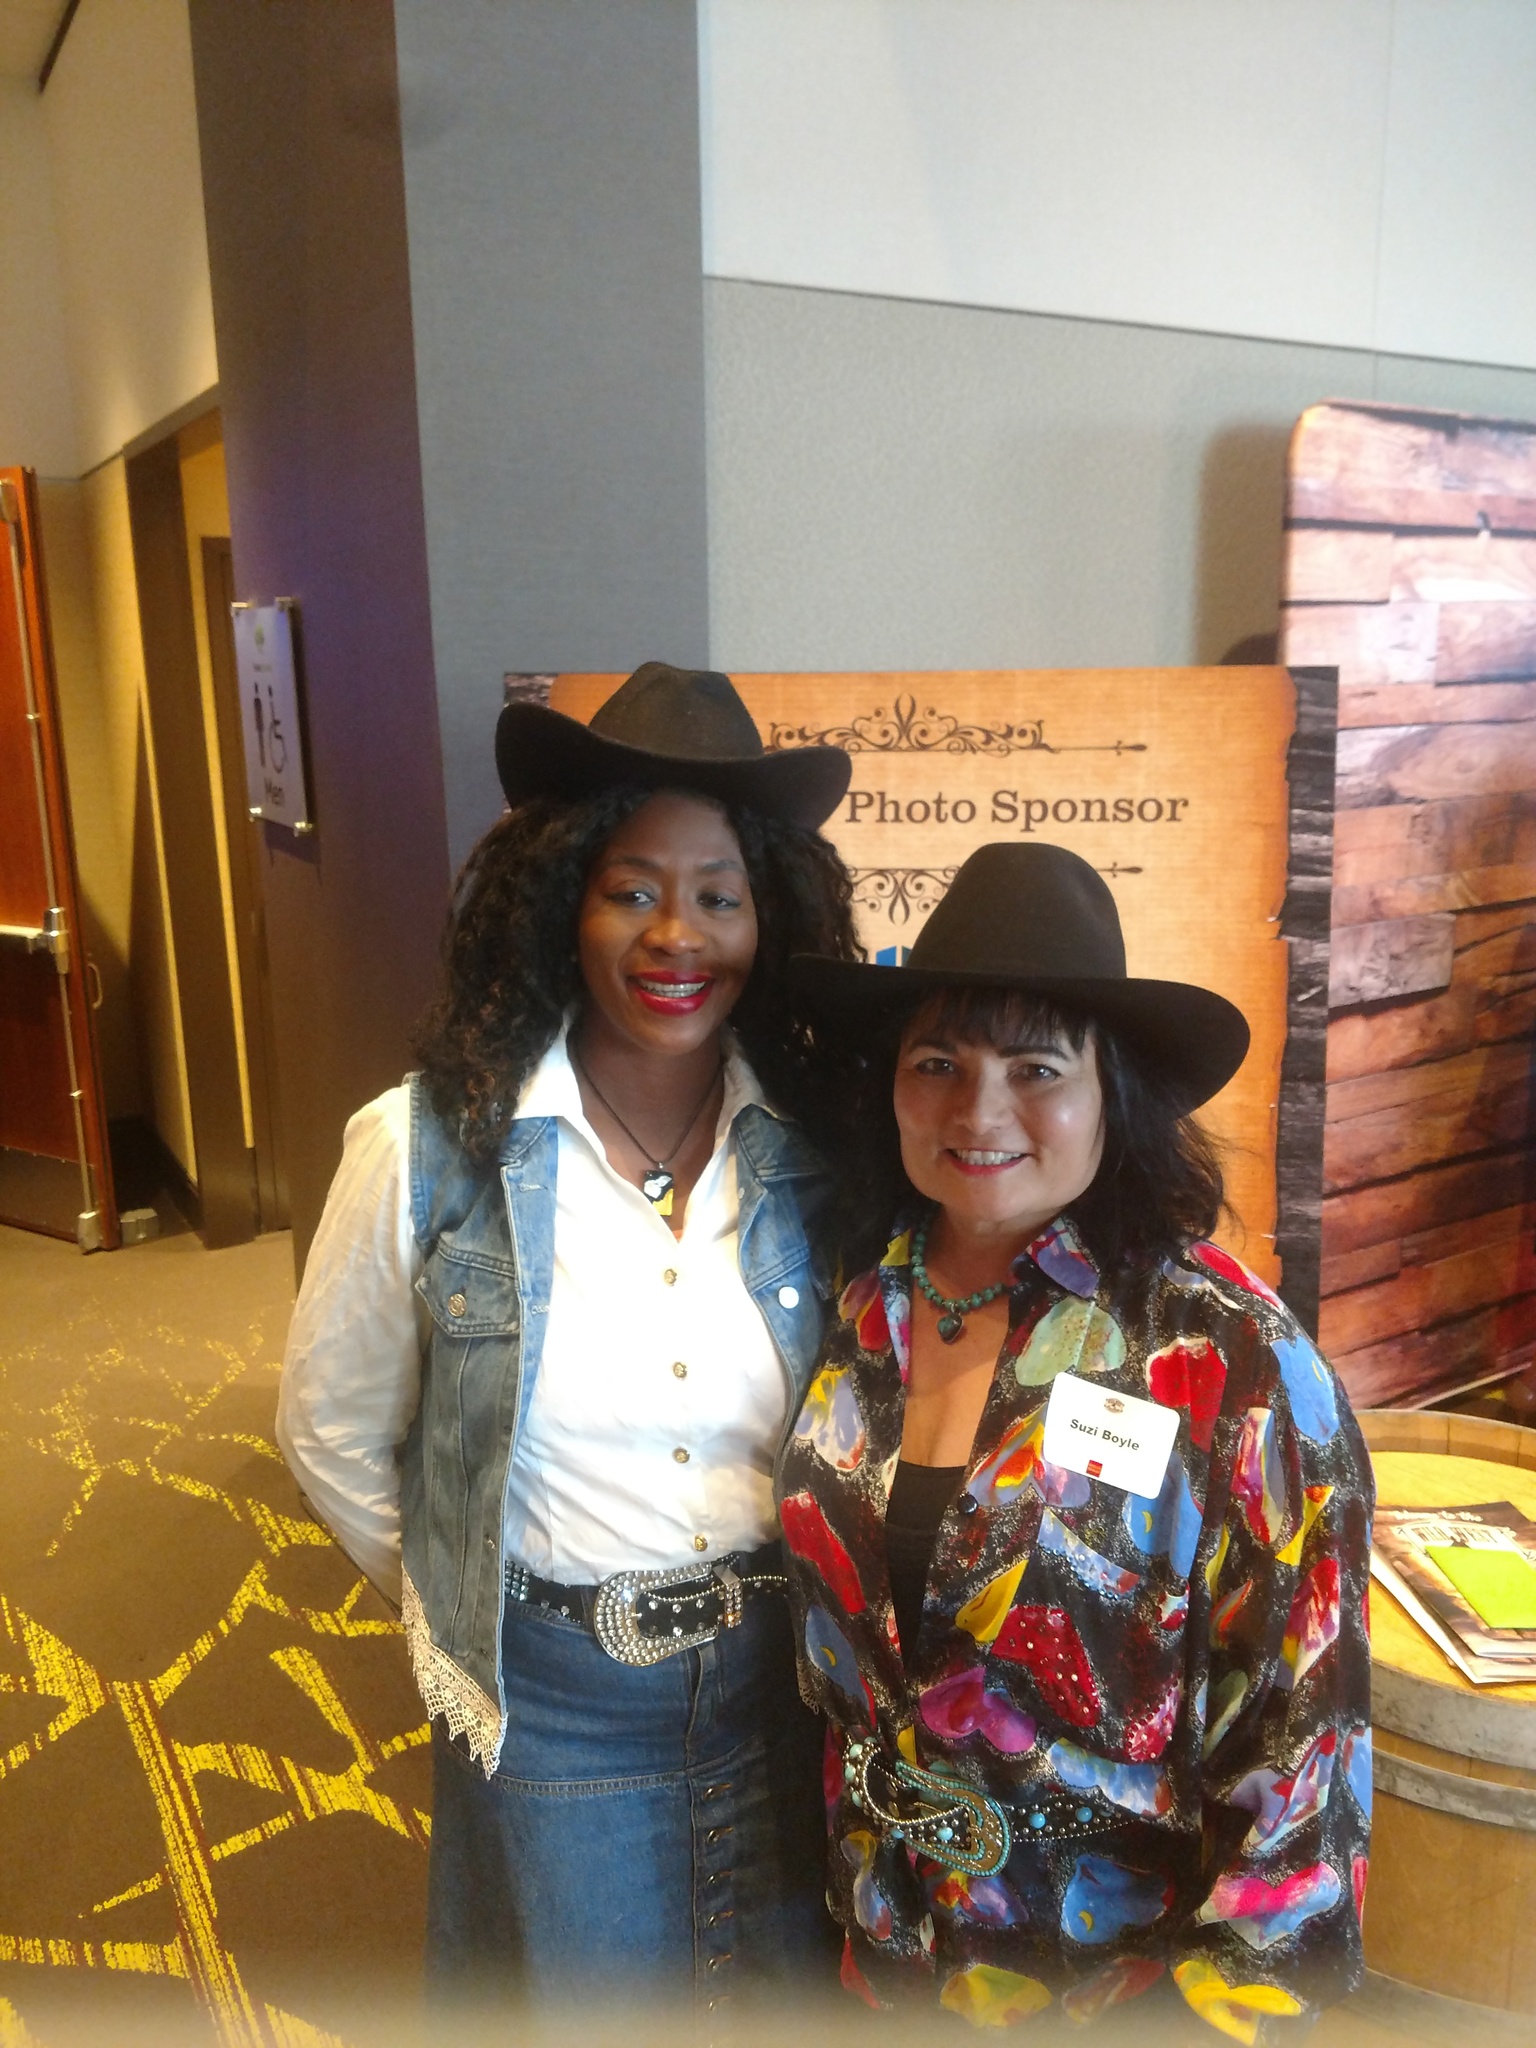 Castle &amp; Cooke Mortgage’s Boise, Idaho branch recently served as a significant sponsor for the biggest charity event in Boise history, the Wild West Auction for Kids